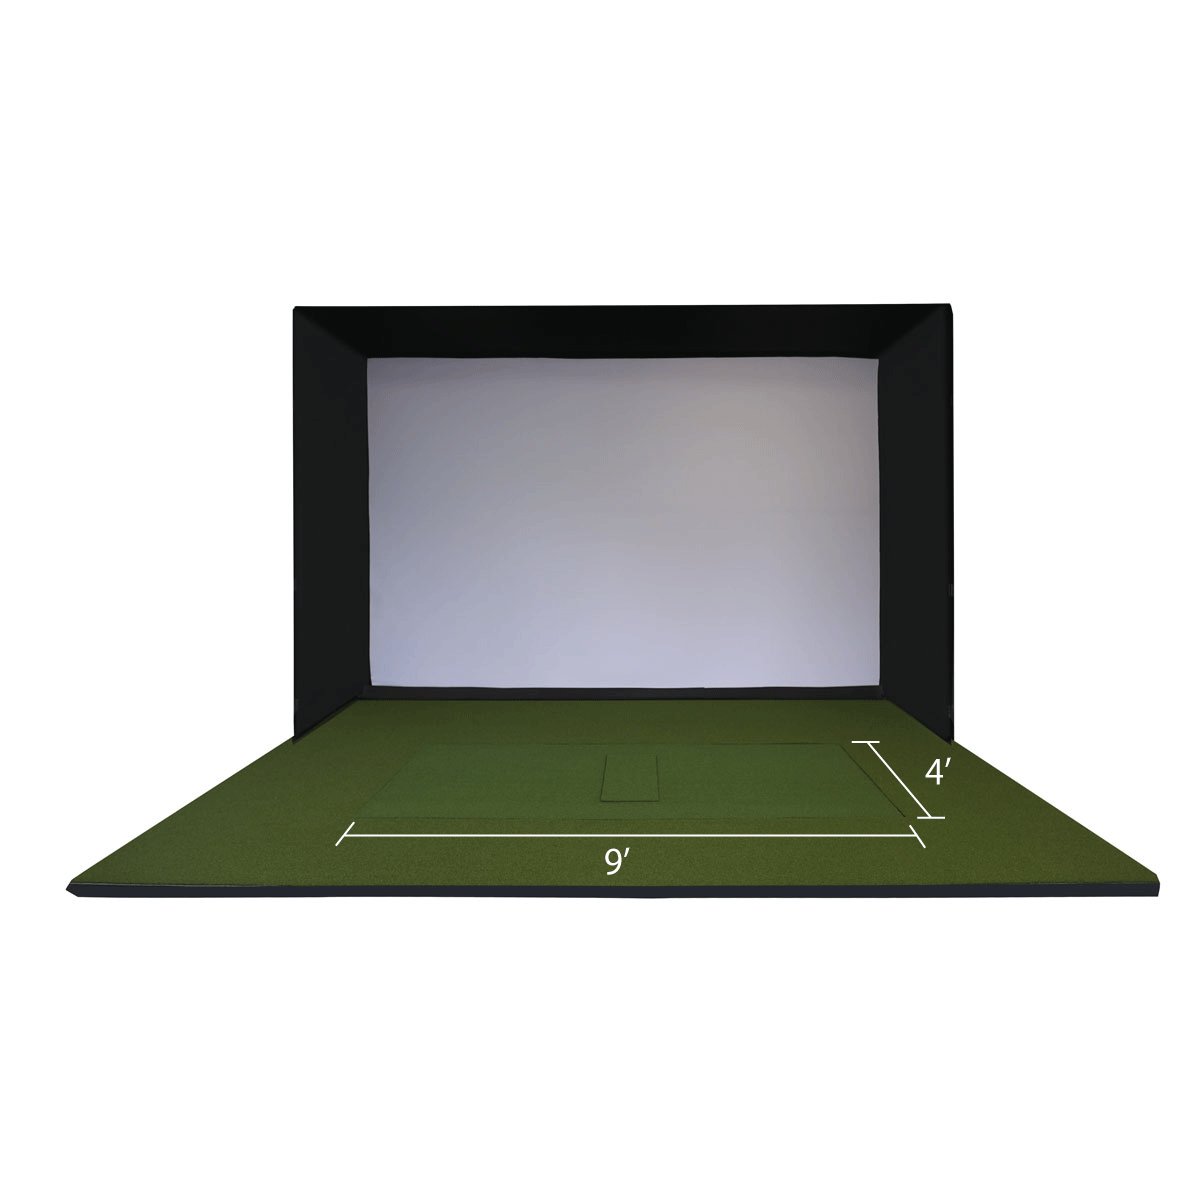 HOW TO BUILD YOUR OWN DIY IMPACT SCREEN ENCLOSURE FOR YOUR GOLF SIMULA